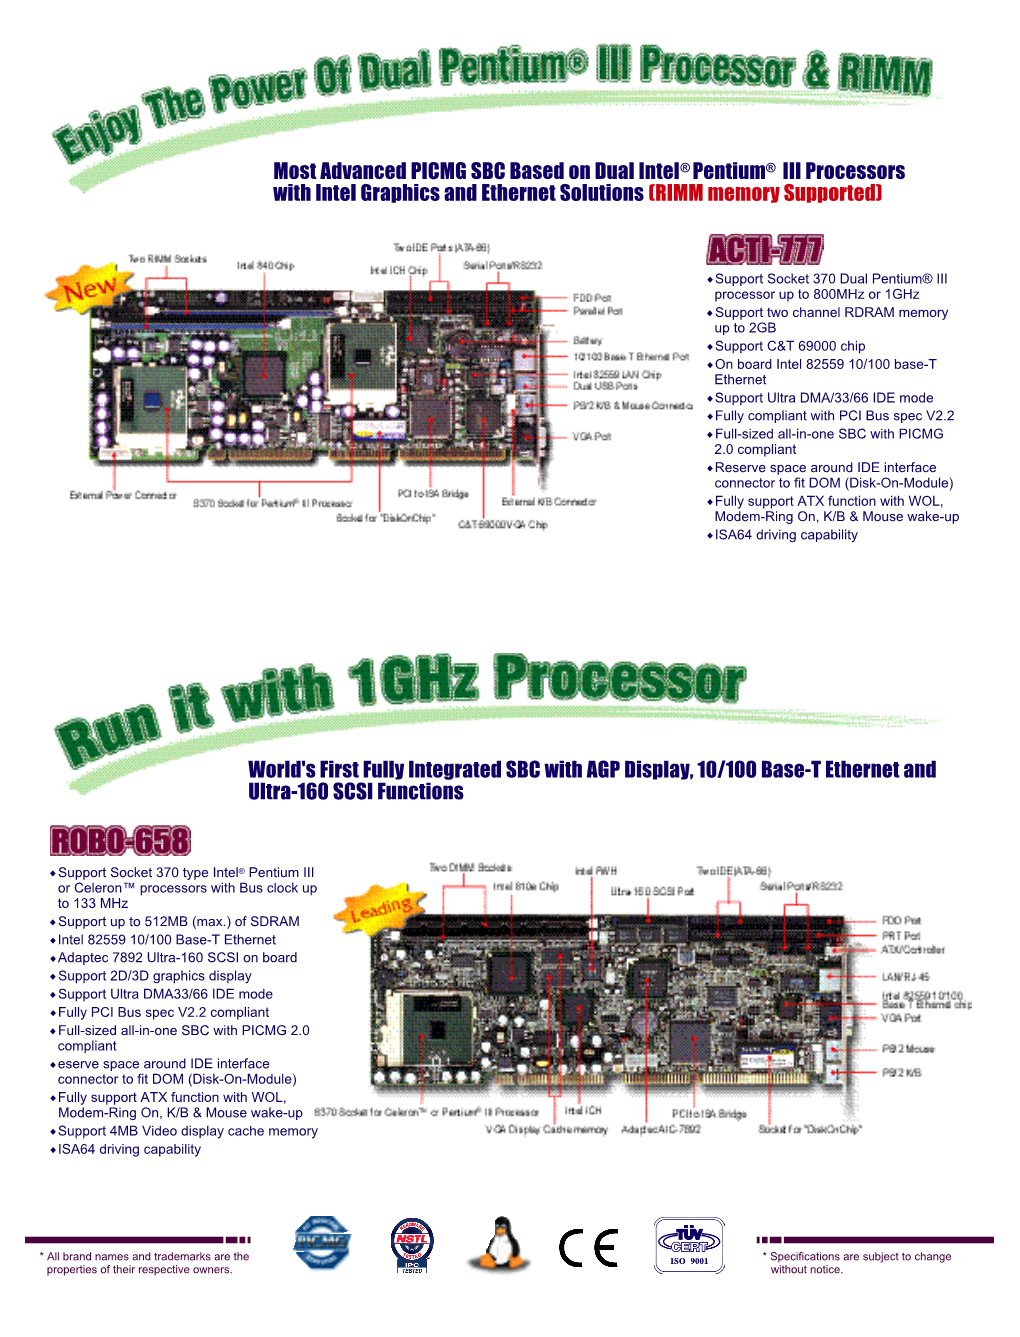 Most Advanced PICMG SBC Based on Dual Intel® P Entium® III Processors with Intel Graphics and Ethernet Solutions